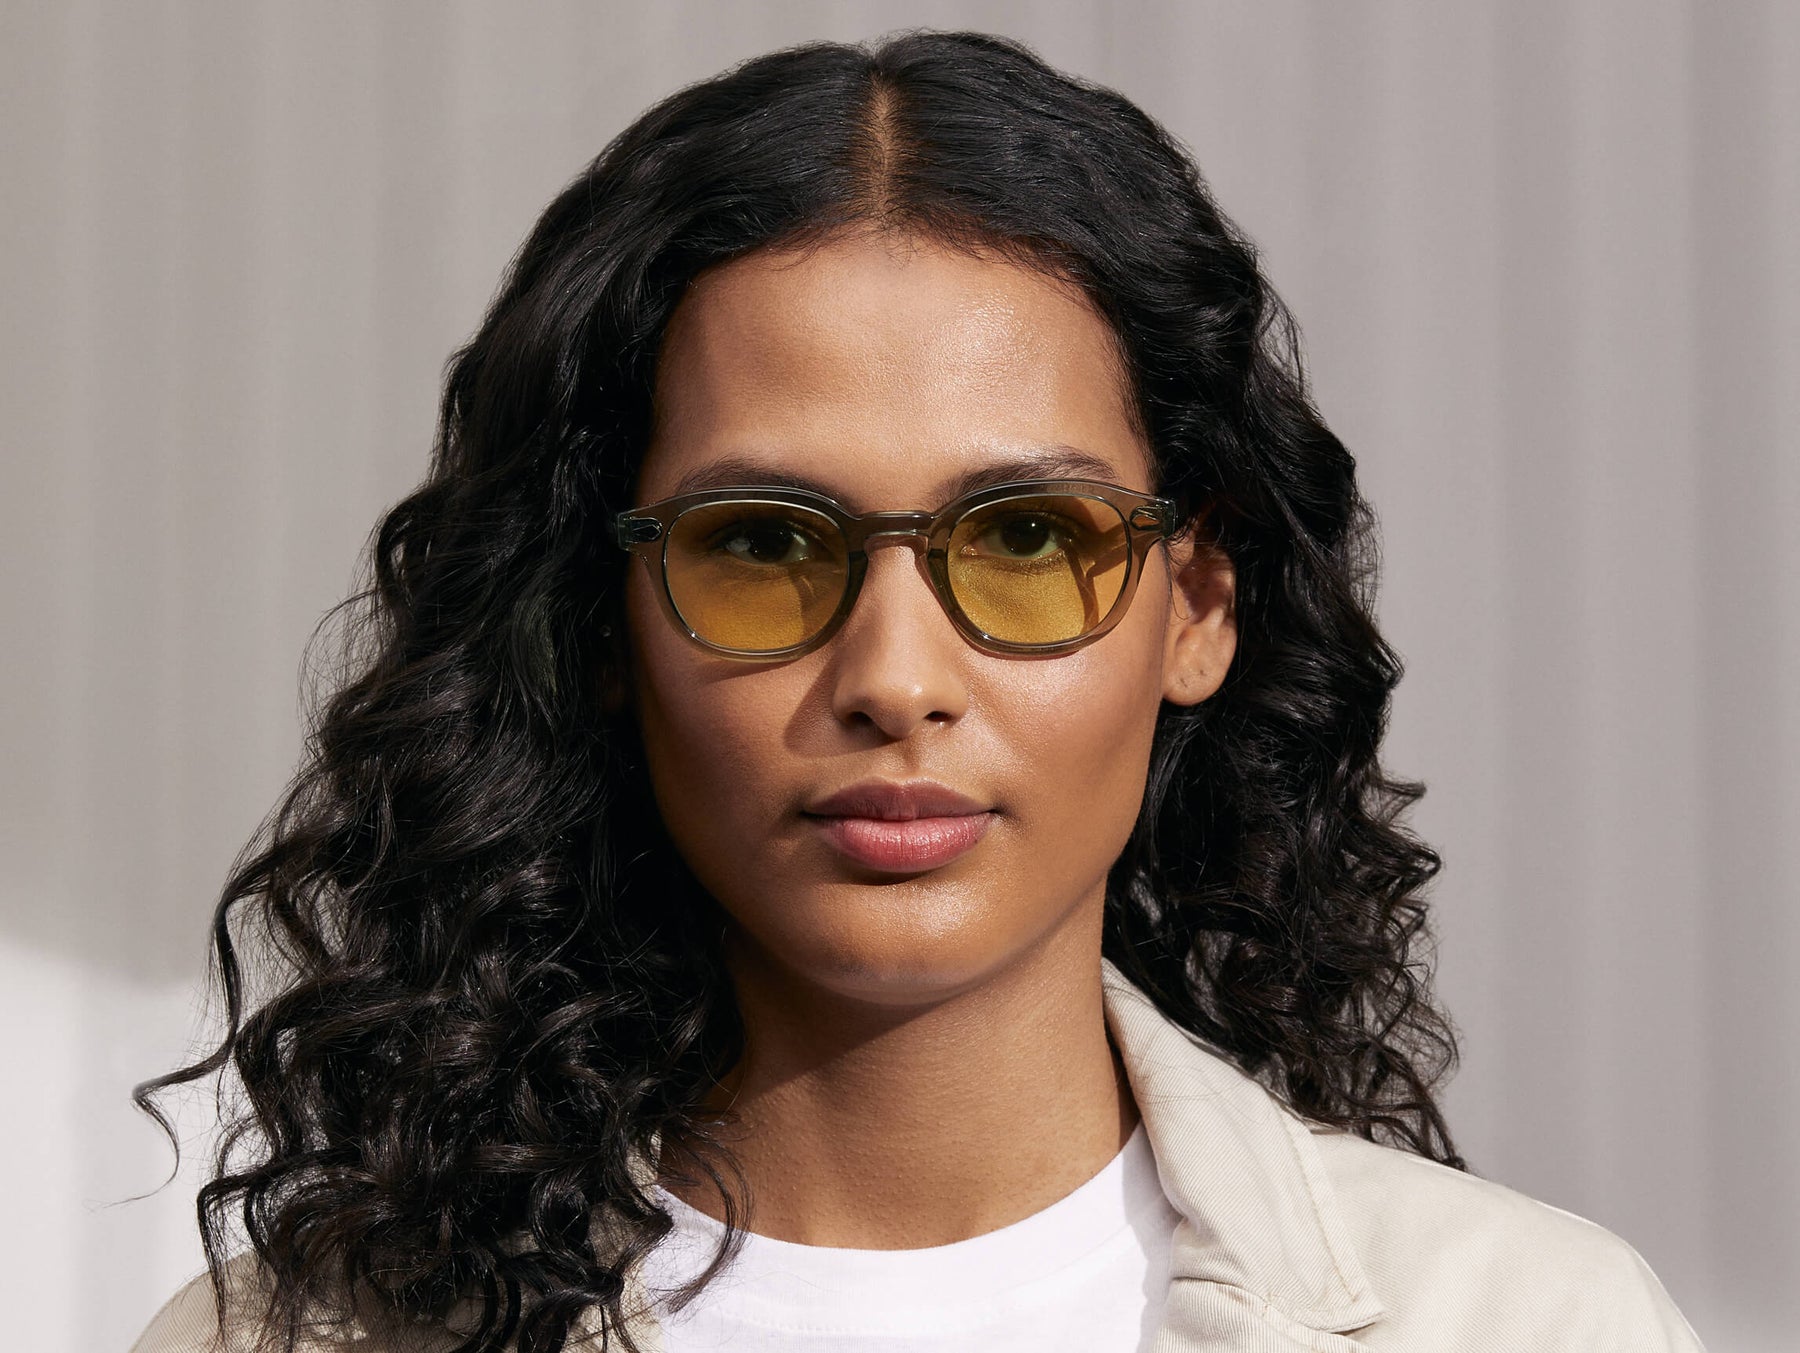 Model is wearing The LEMTOSH in Sage in size 46 with Limelight Tinted Lenses